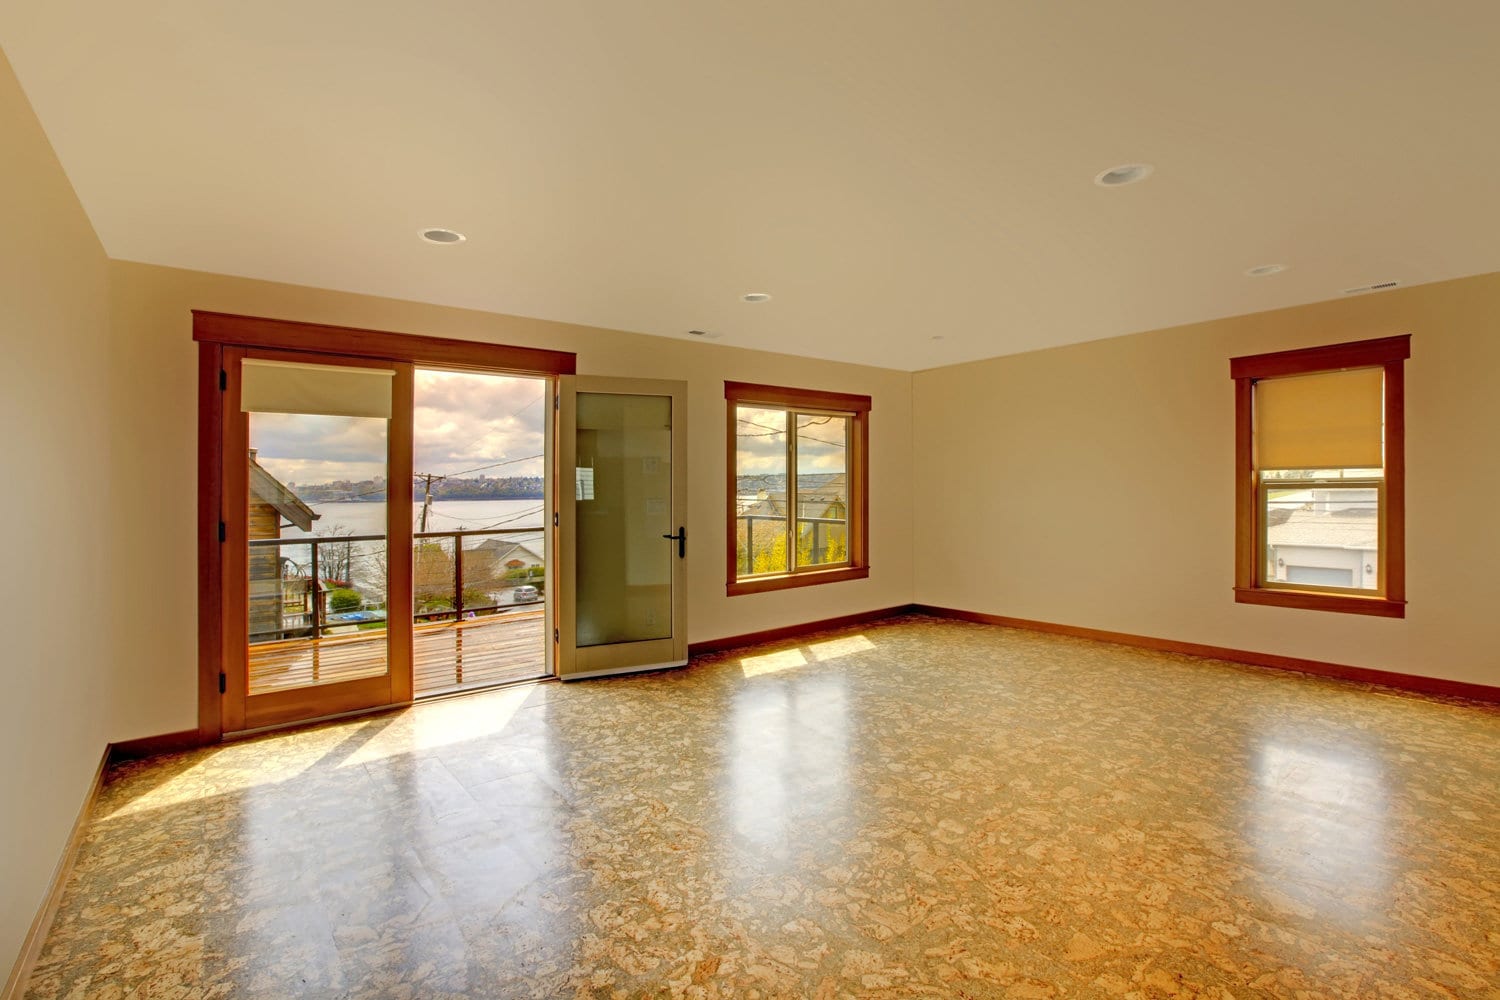 Large bright empty room with cork floor and balcony.New luxury home interior.